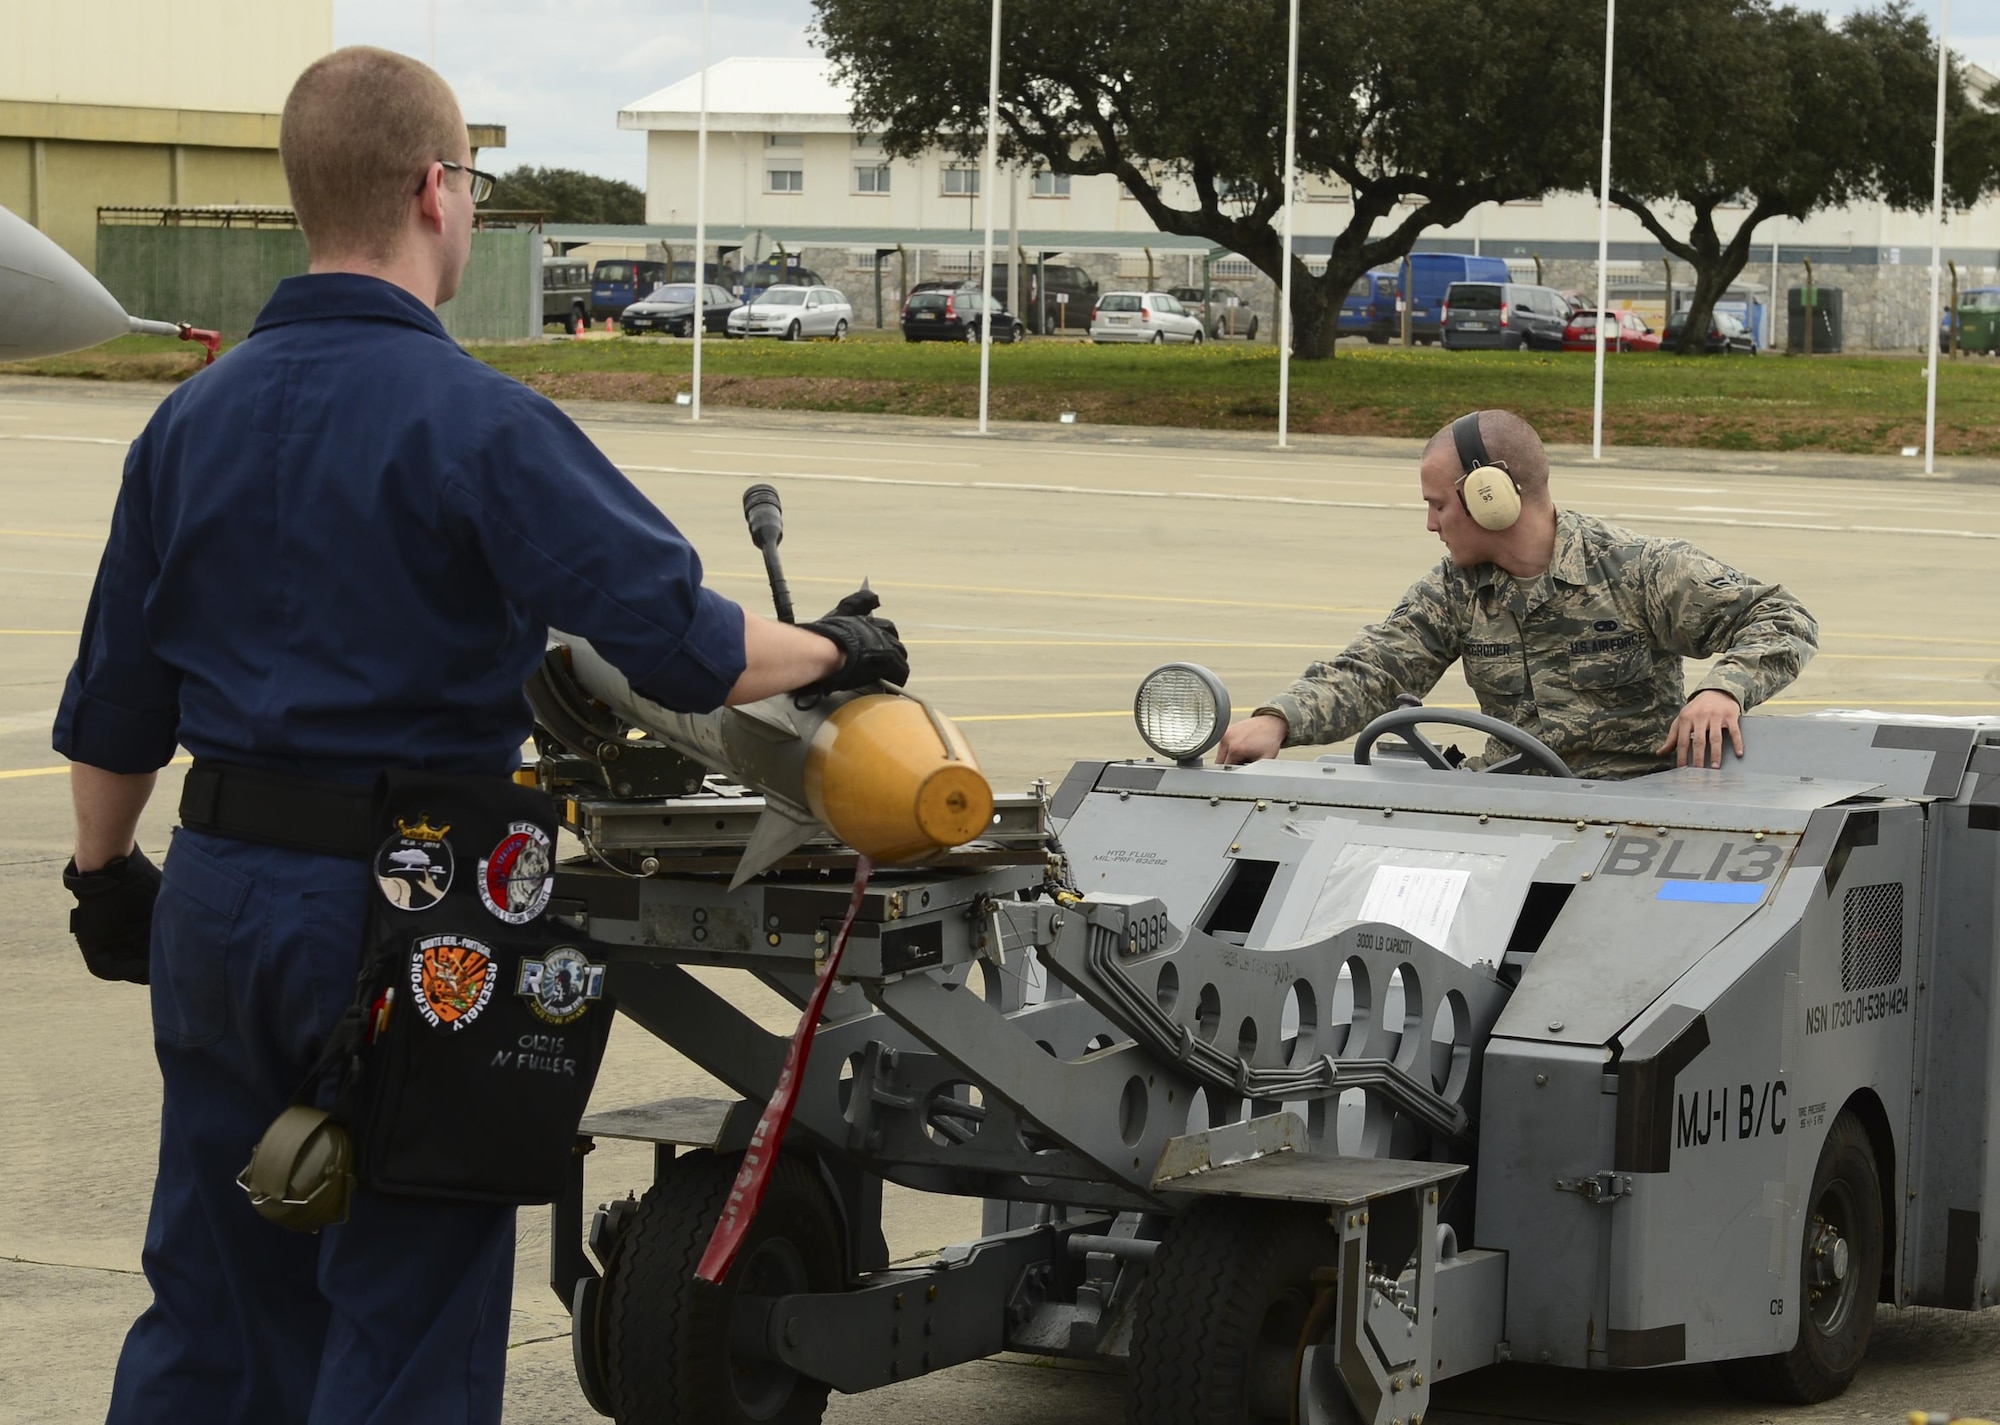 Senior Airman Noah Fuller and Airman 1st Class Edward McGroder, 493rd Aircraft Maintenance Unit weapons load crew members, transport simulated munitions on an MJ-1 Lift Truck during exercise Real Thaw at Beja Air Base, Portugal, Feb. 25, 2016. Real Thaw was designed to provide joint interoperability training throughout the execution of a vast range of battlefield missions, to include day and night operations in a high-intensity joint setting. (U.S. Air Force photo/Senior Airman Dawn M. Weber)